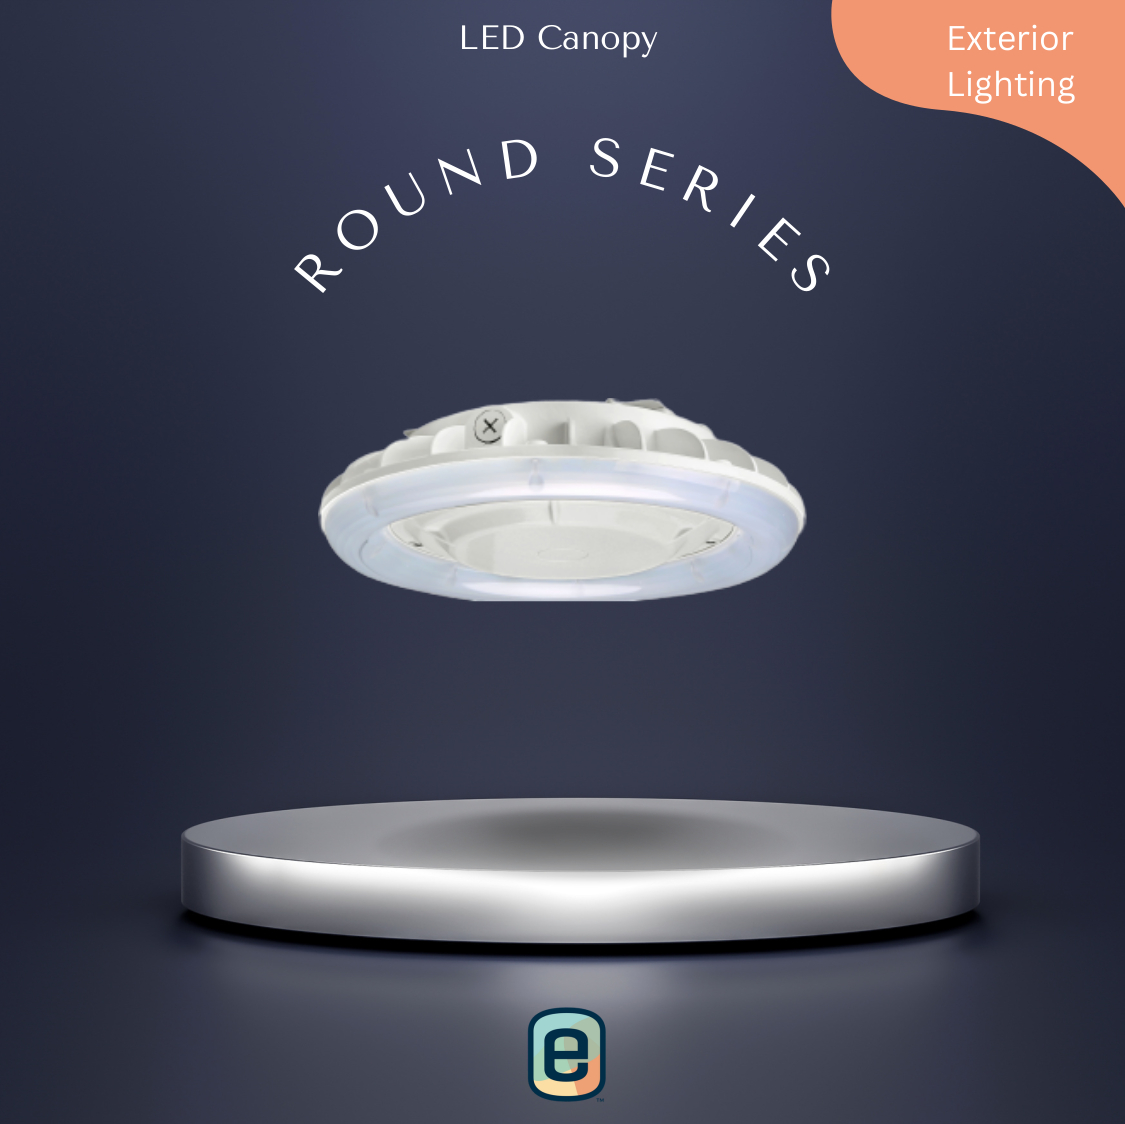 Round LED canopy light fixture, pendant style, EL-MS-CPR